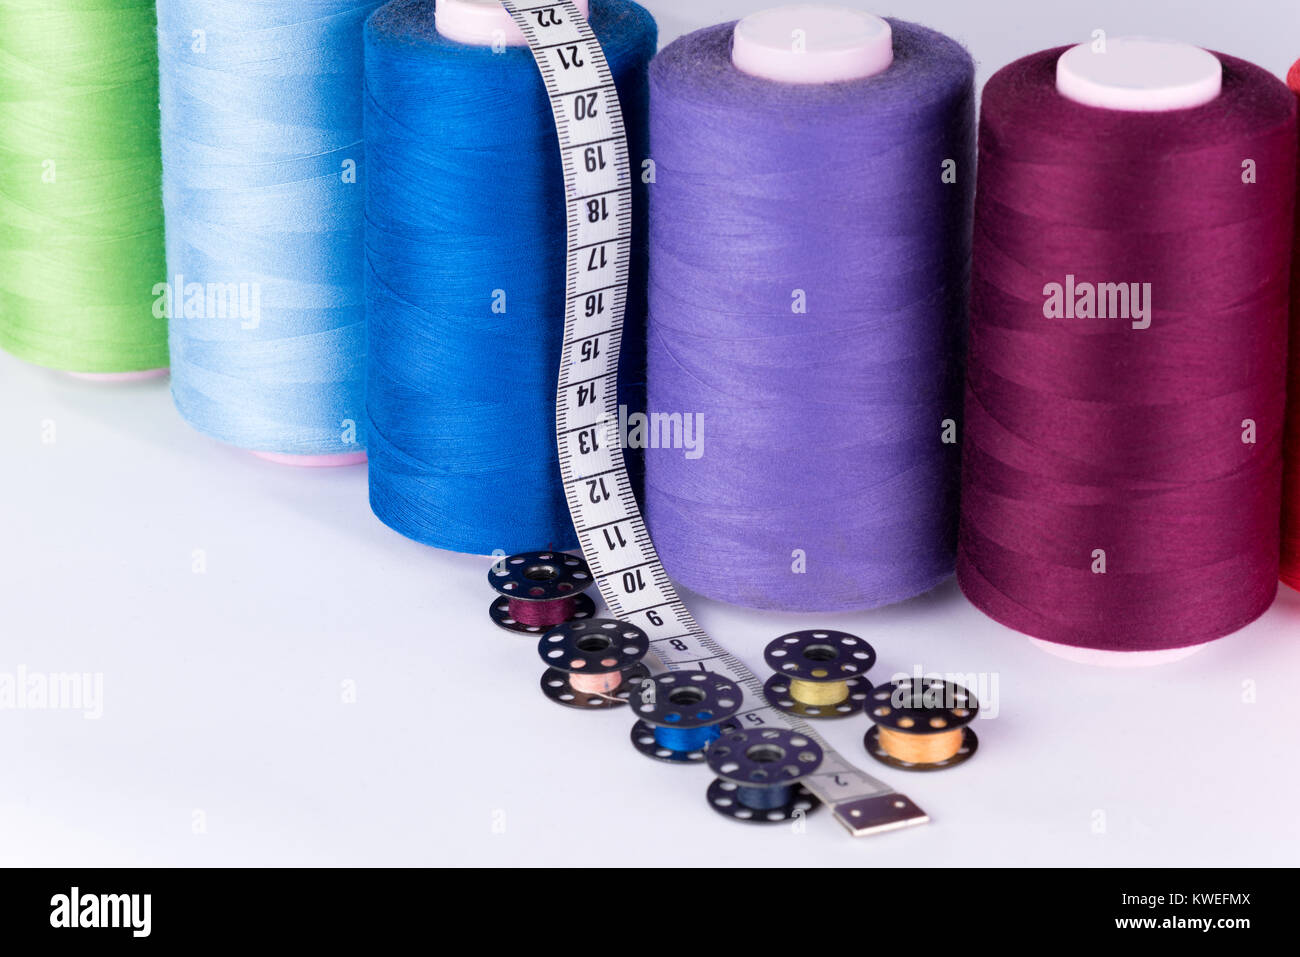 Tailor supplies; yarn coils, mesure and rollers Stock Photo